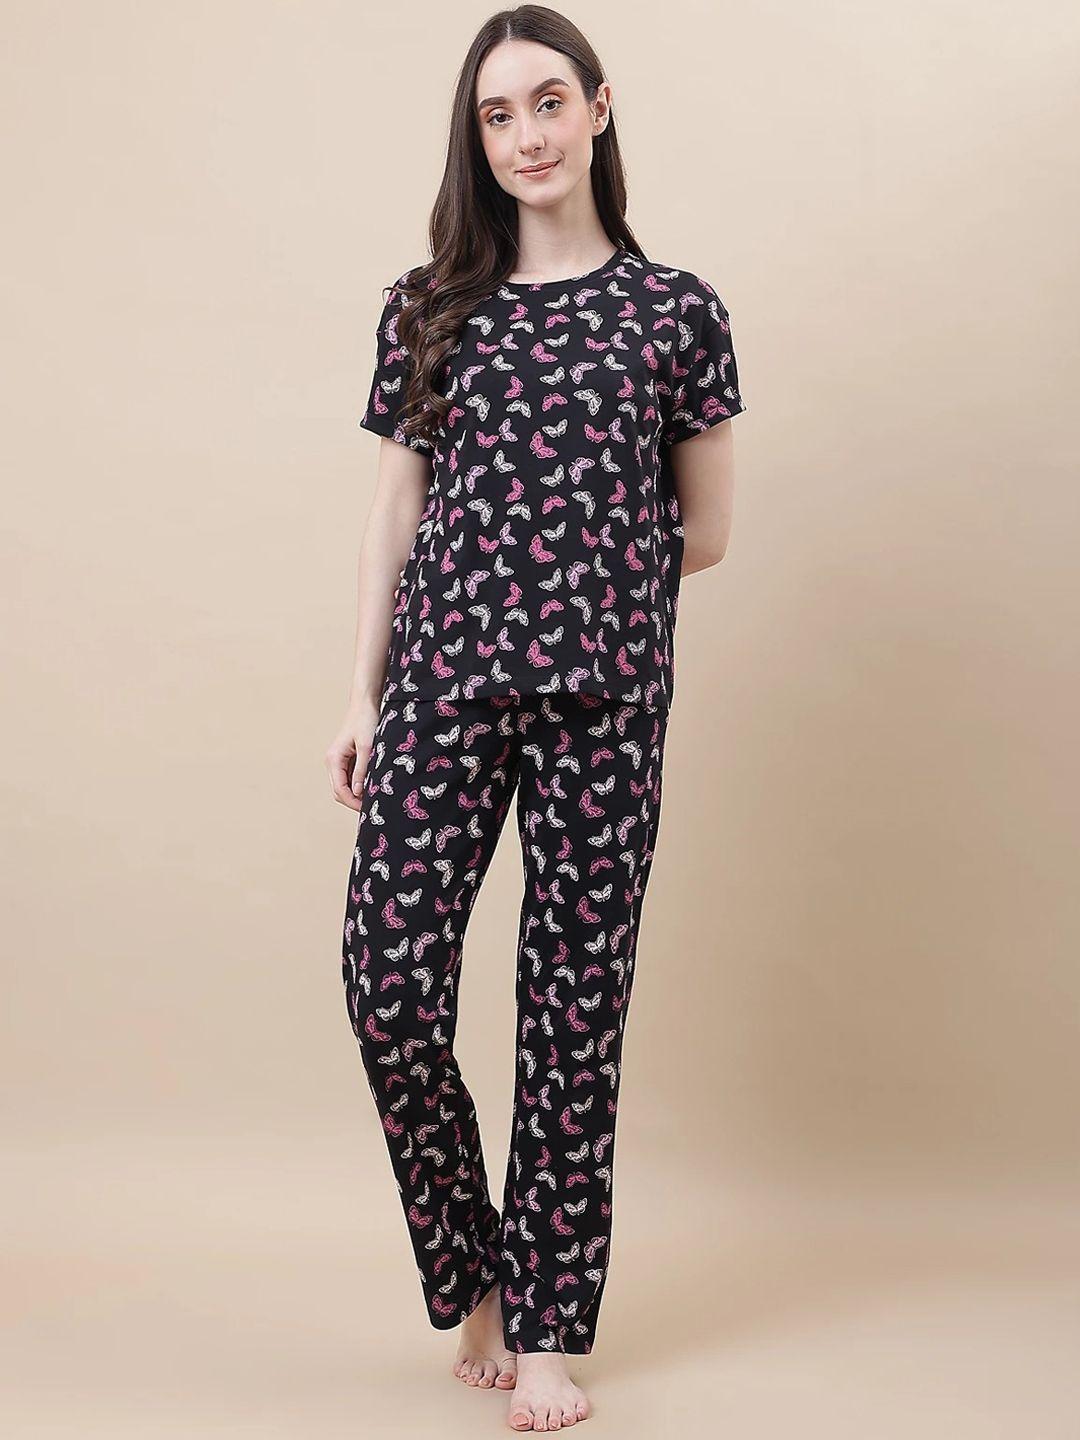 marks-&-spencer-conversational-printed-pure-cotton-night-suit